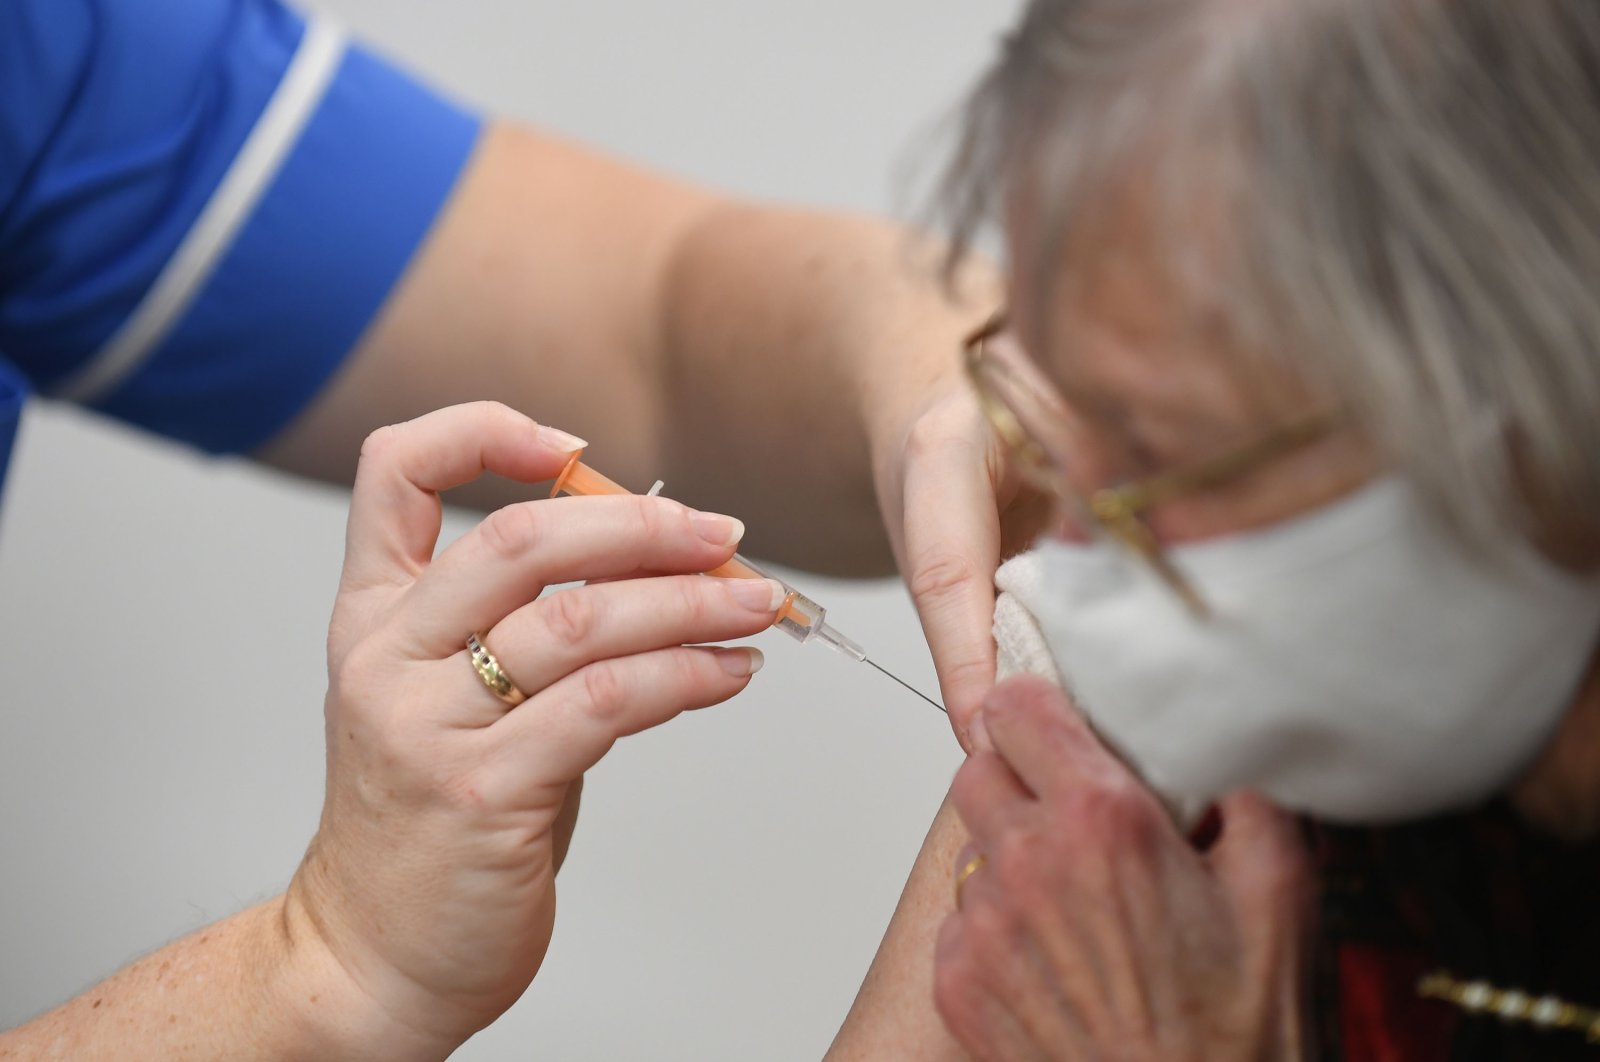 Heather Gallagher, 93, receives an injection of a COVID-19 vaccine at the National Health Service (NHS) vaccine center at Robertson House, Stevenage, England, Jan. 11, 2021. (Getty Images)